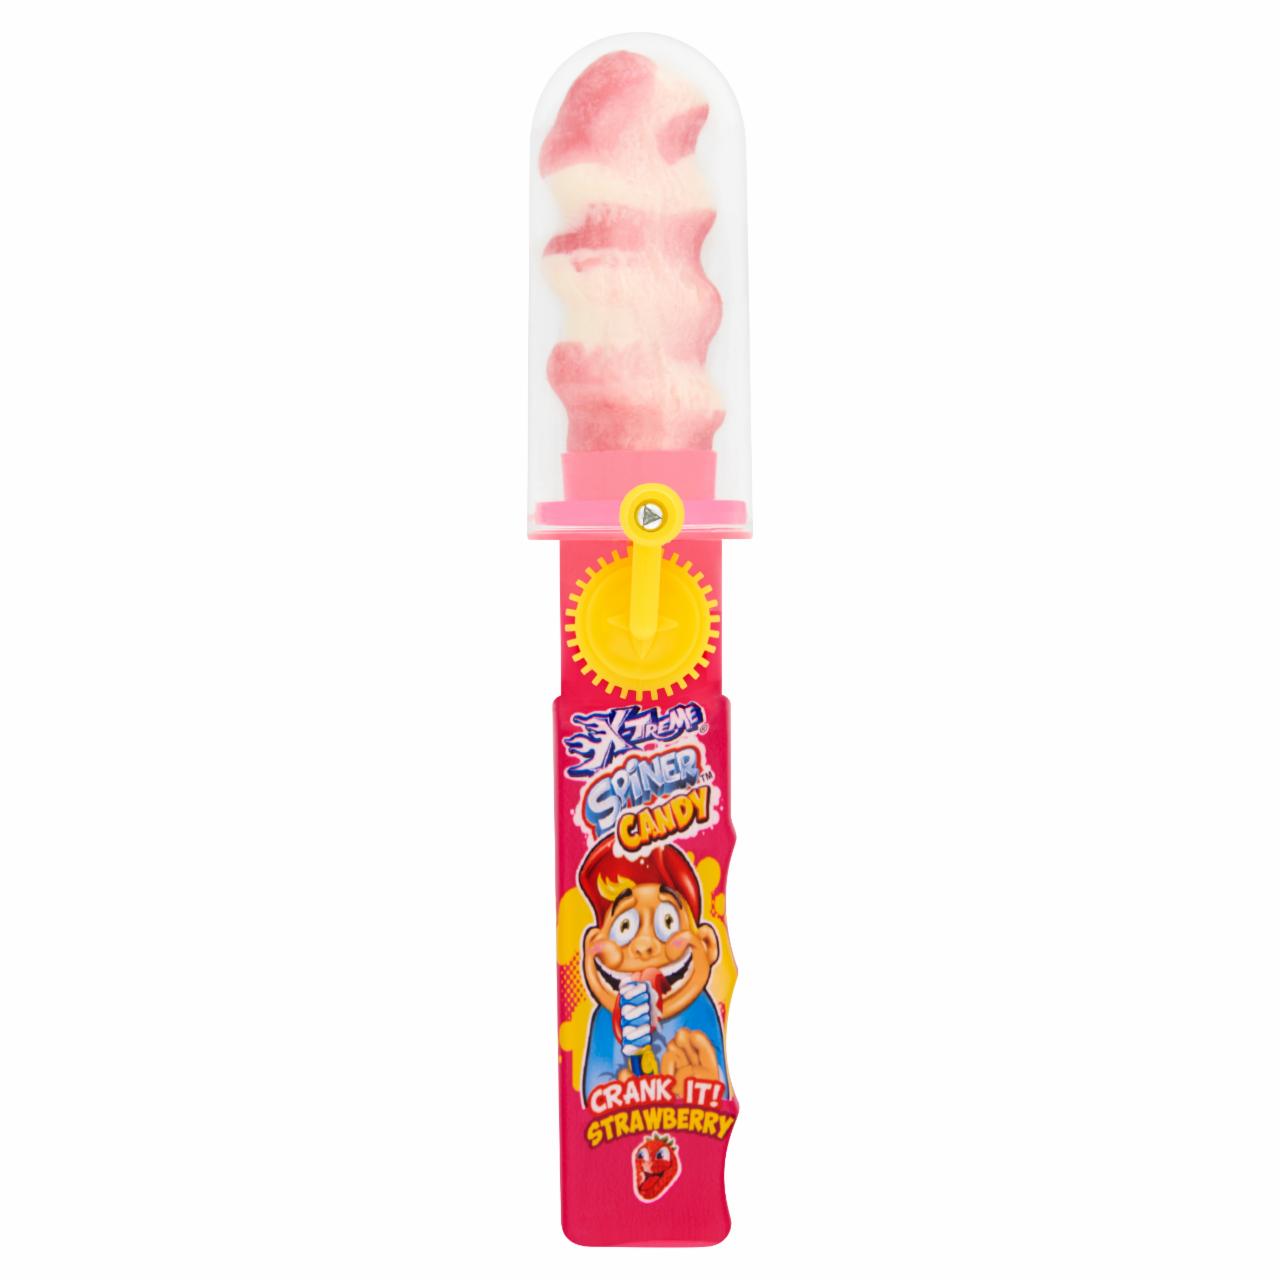 Photo - X-Treme Spiner Candy Fruit Flavored Lollipop 23 g